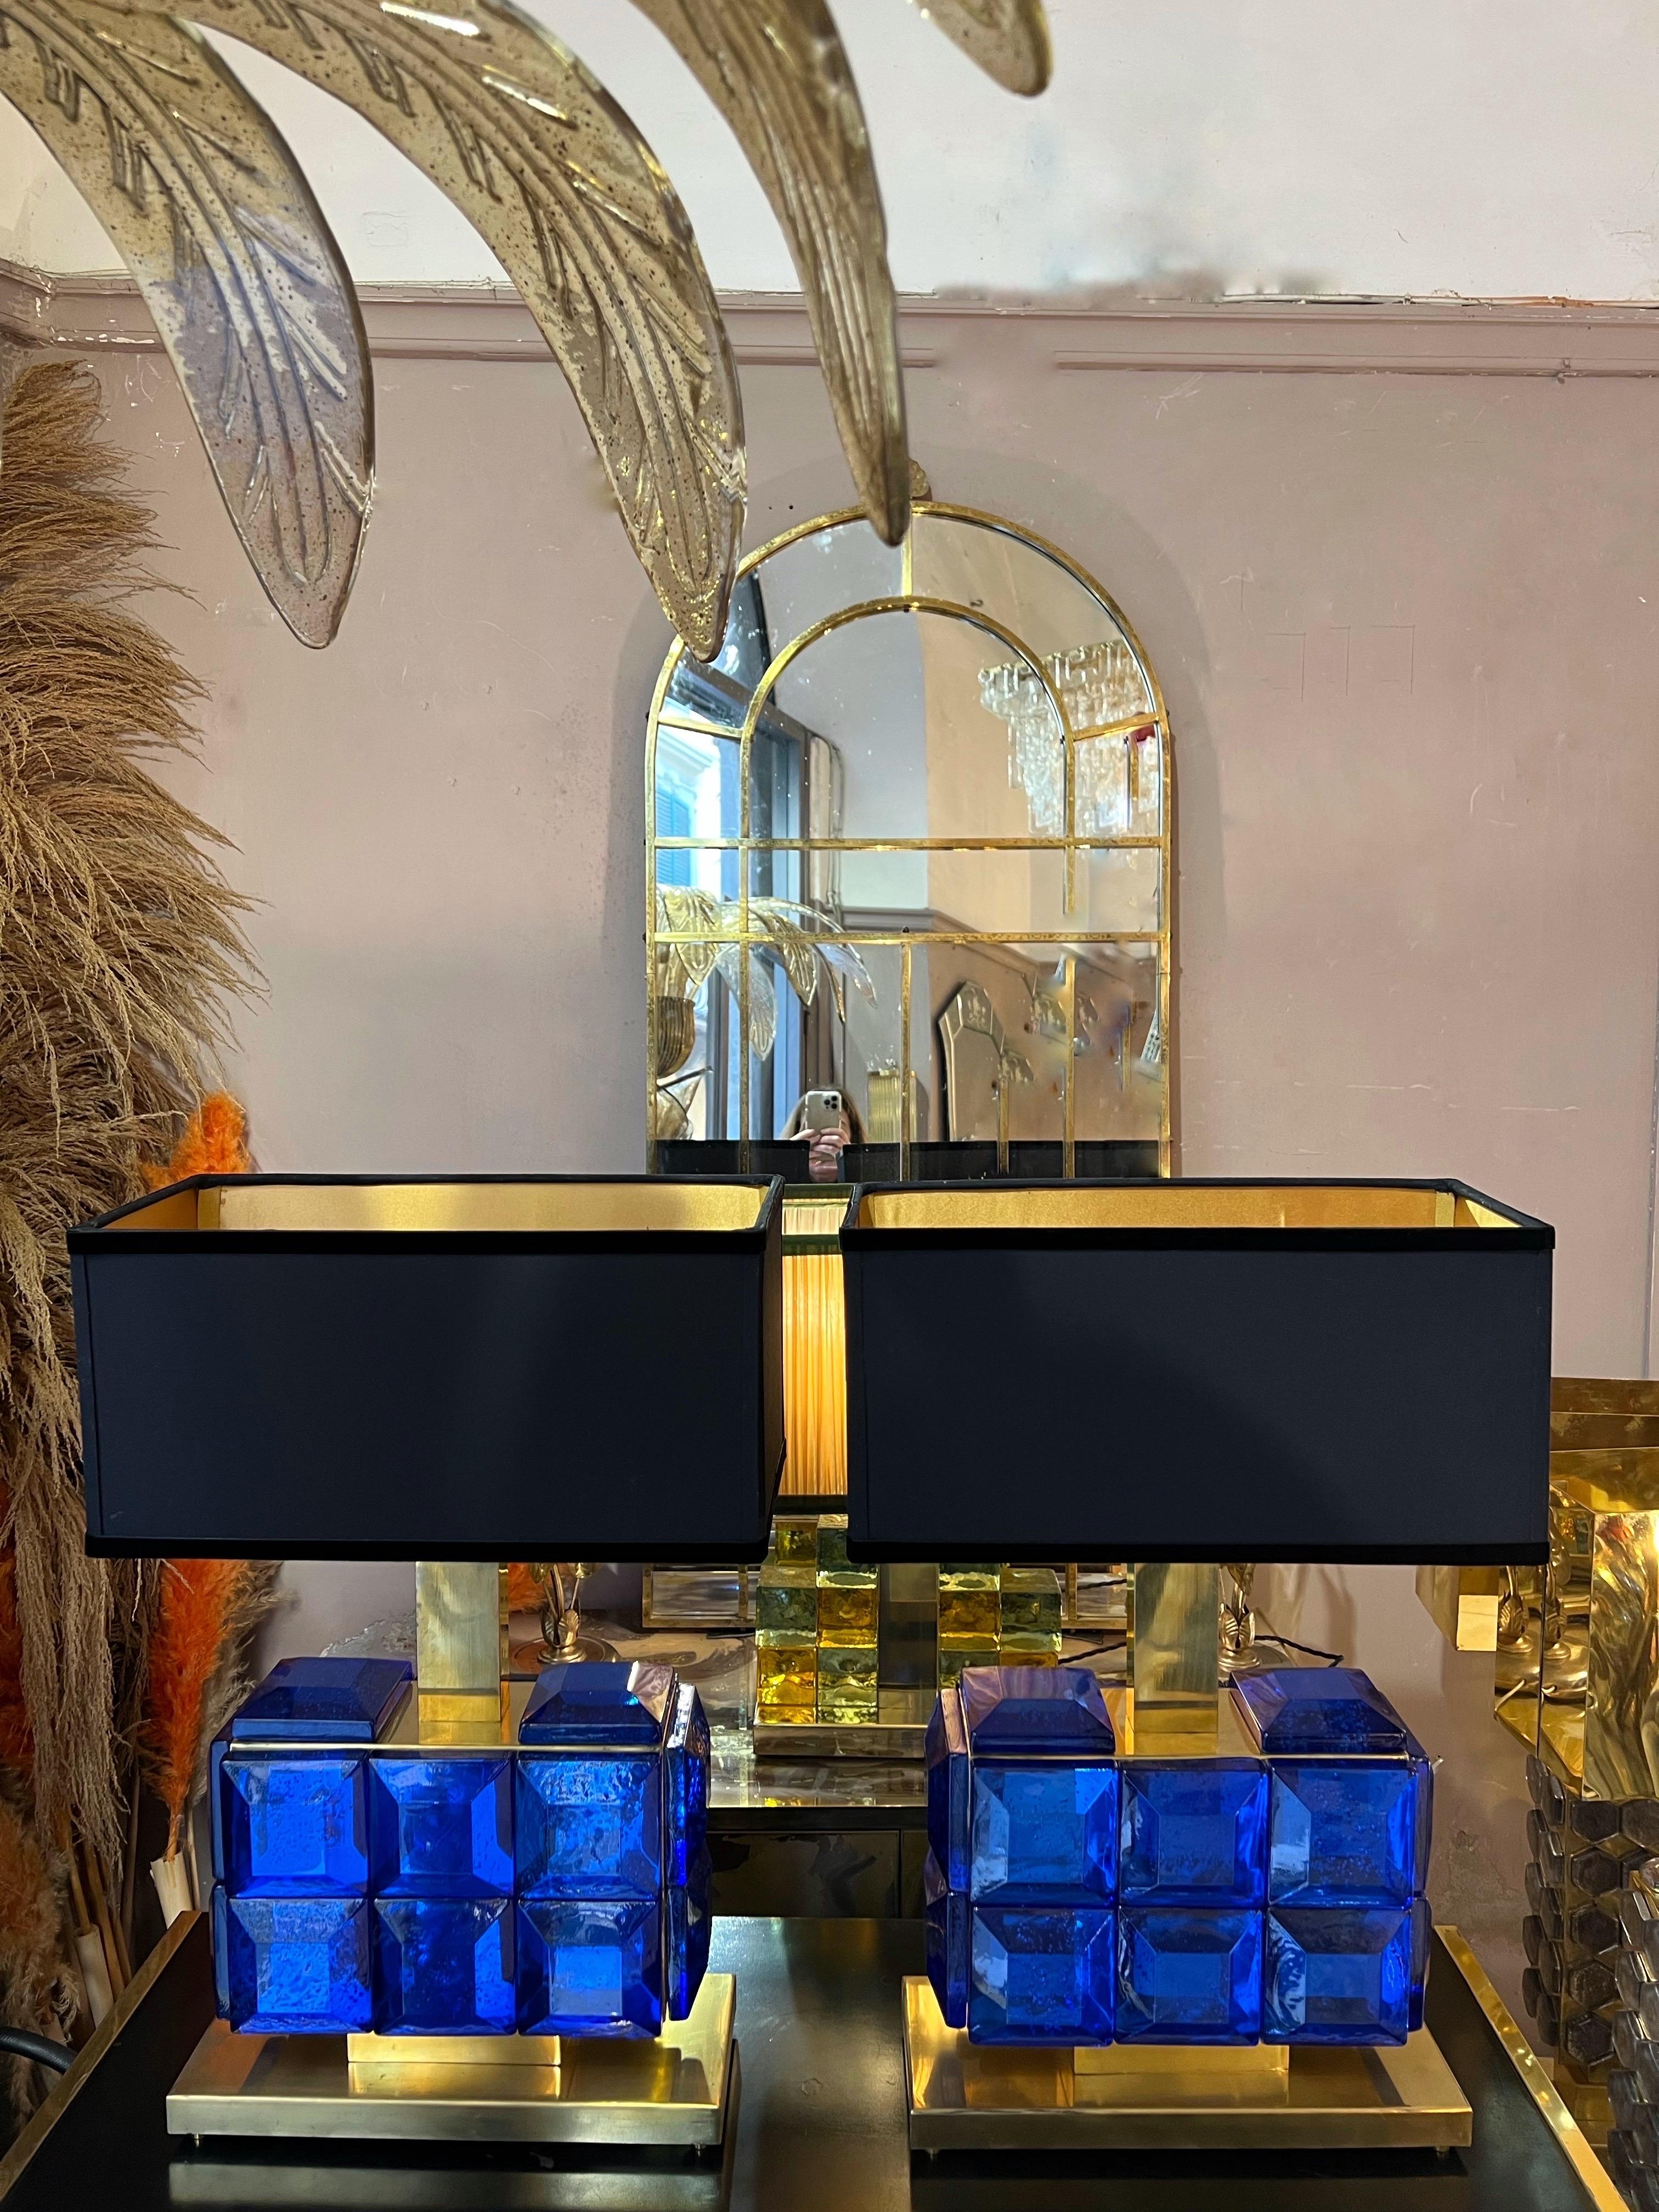 Pair of blue sapphire Murano glass Jewel table lamps with brass base. We have realized our handcrafted lampshades in black fabric outside and gold inside, black velvet edge.
Measures of the lamp without lampshade: cm 39 x 15 x H 30.